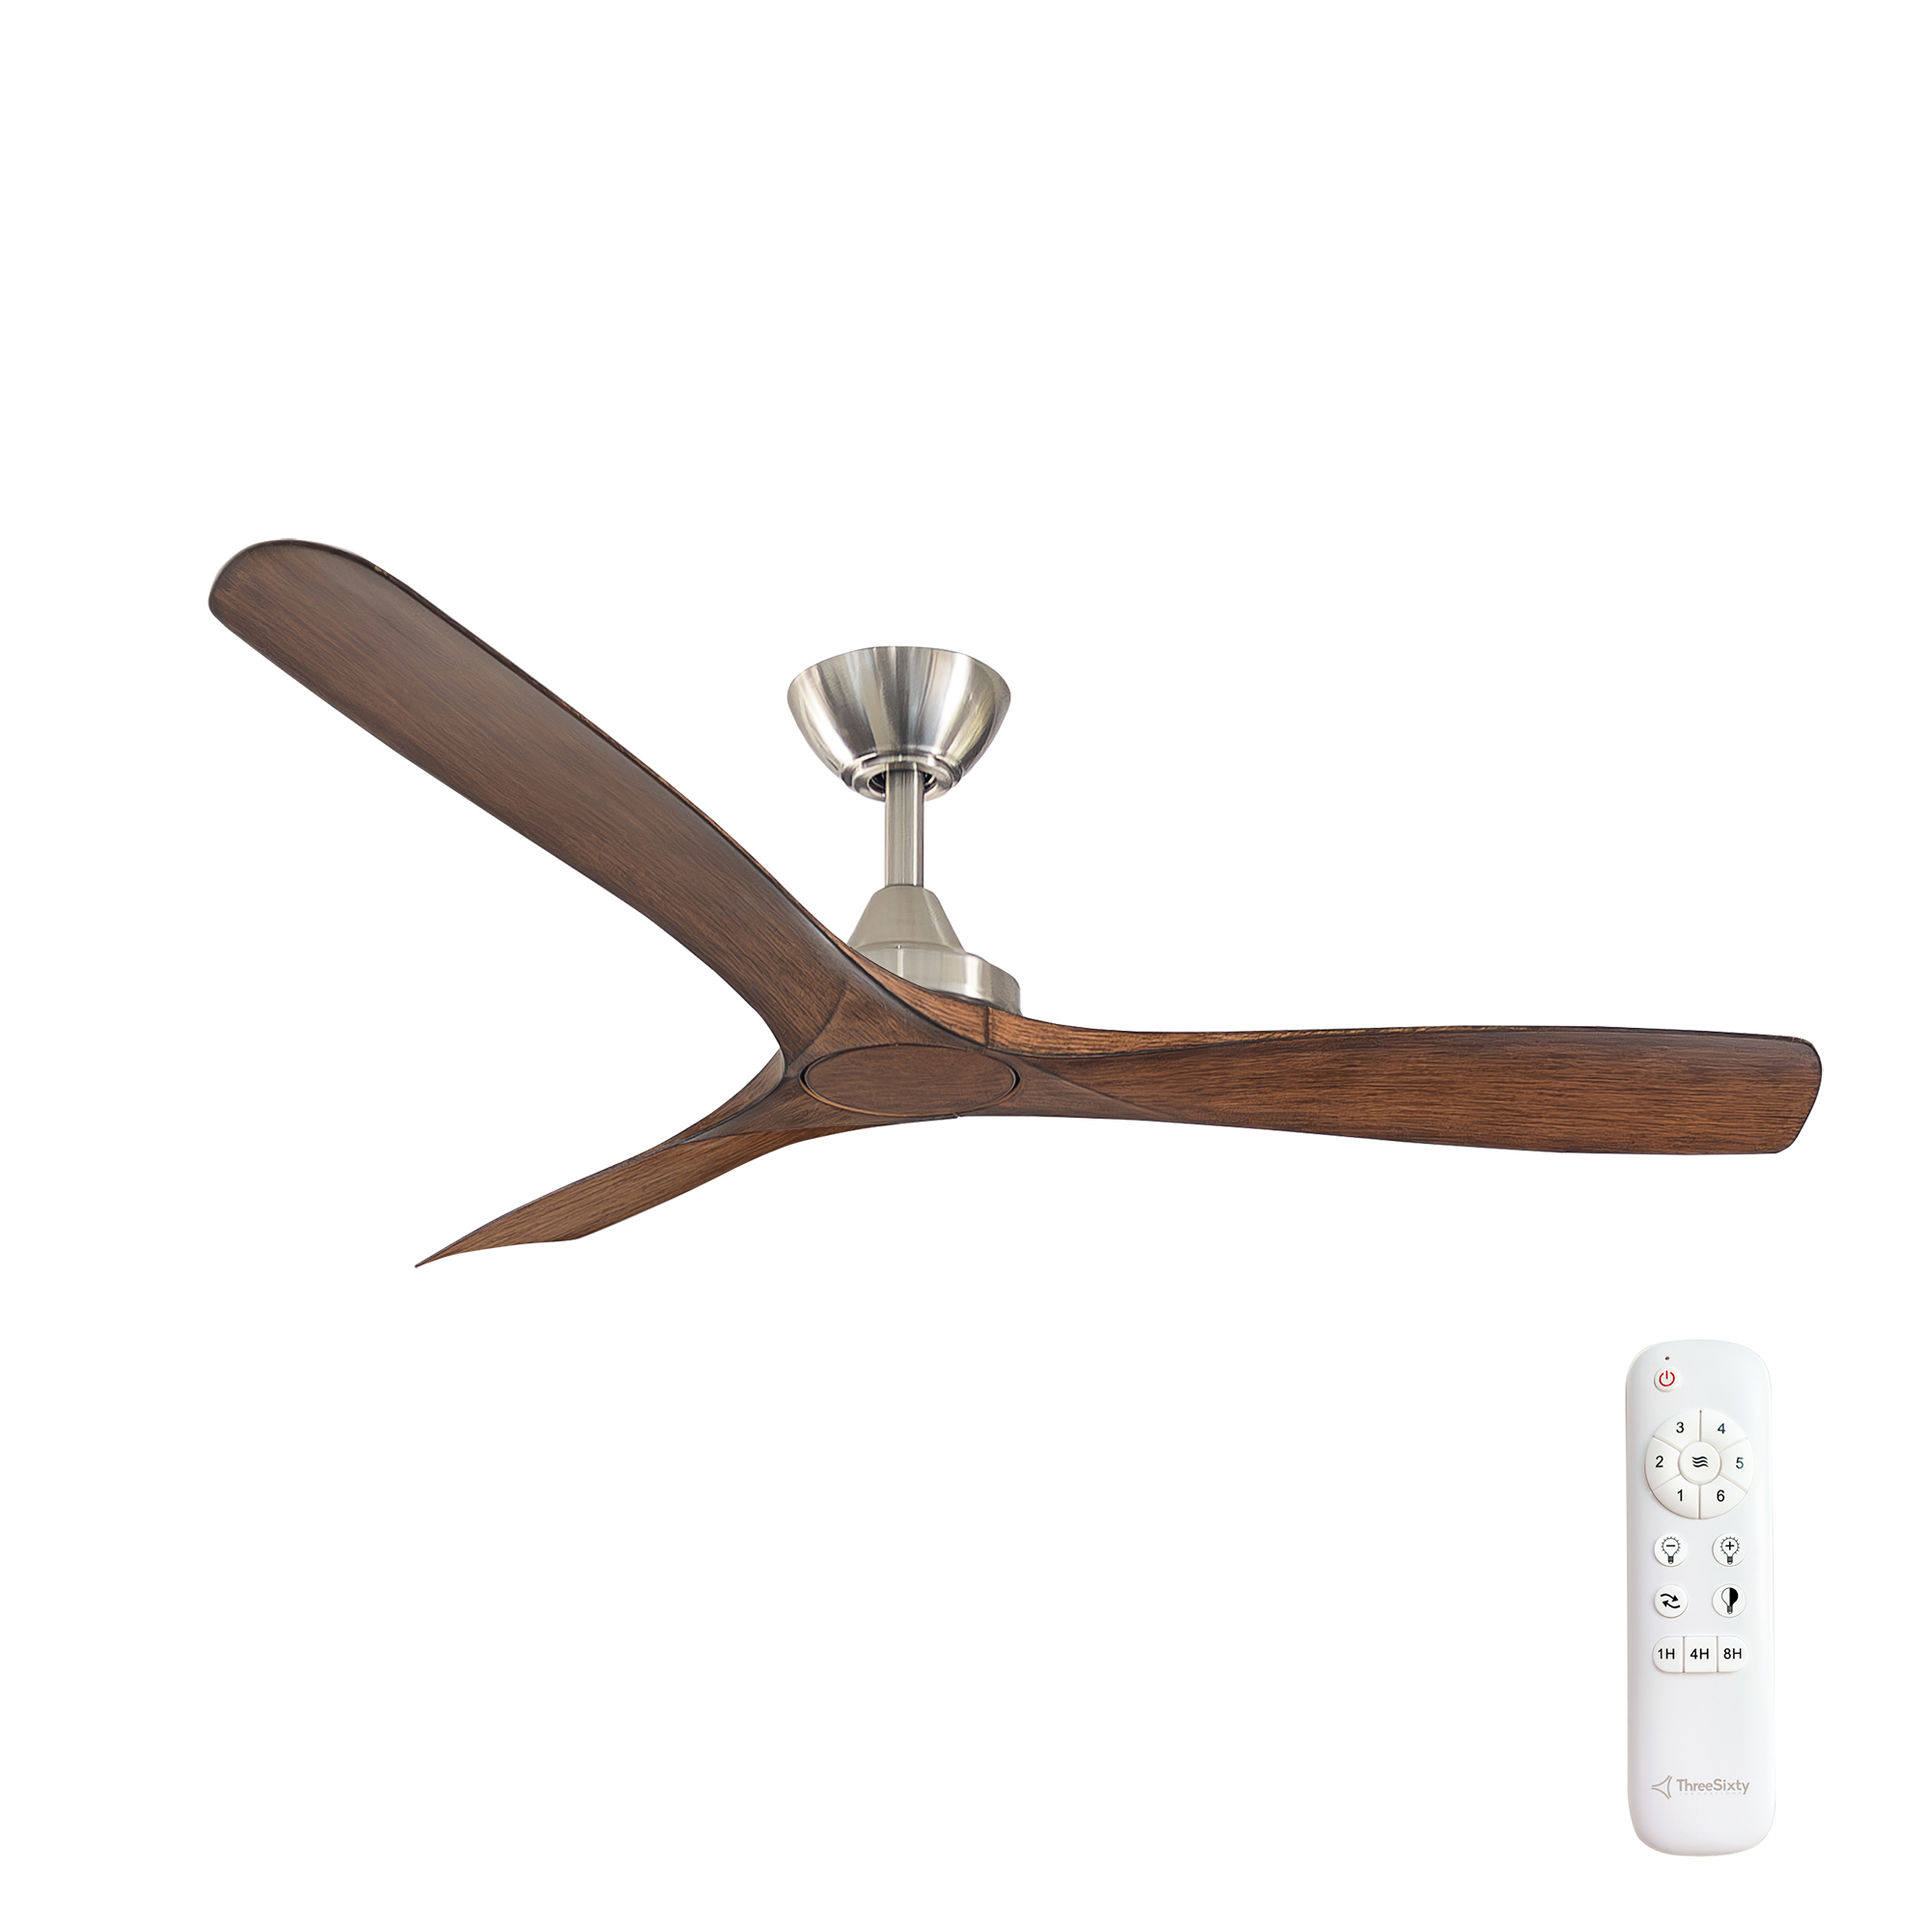 52" Spitfire DC Ceiling Fan in Brushed Nickel with Koa blades